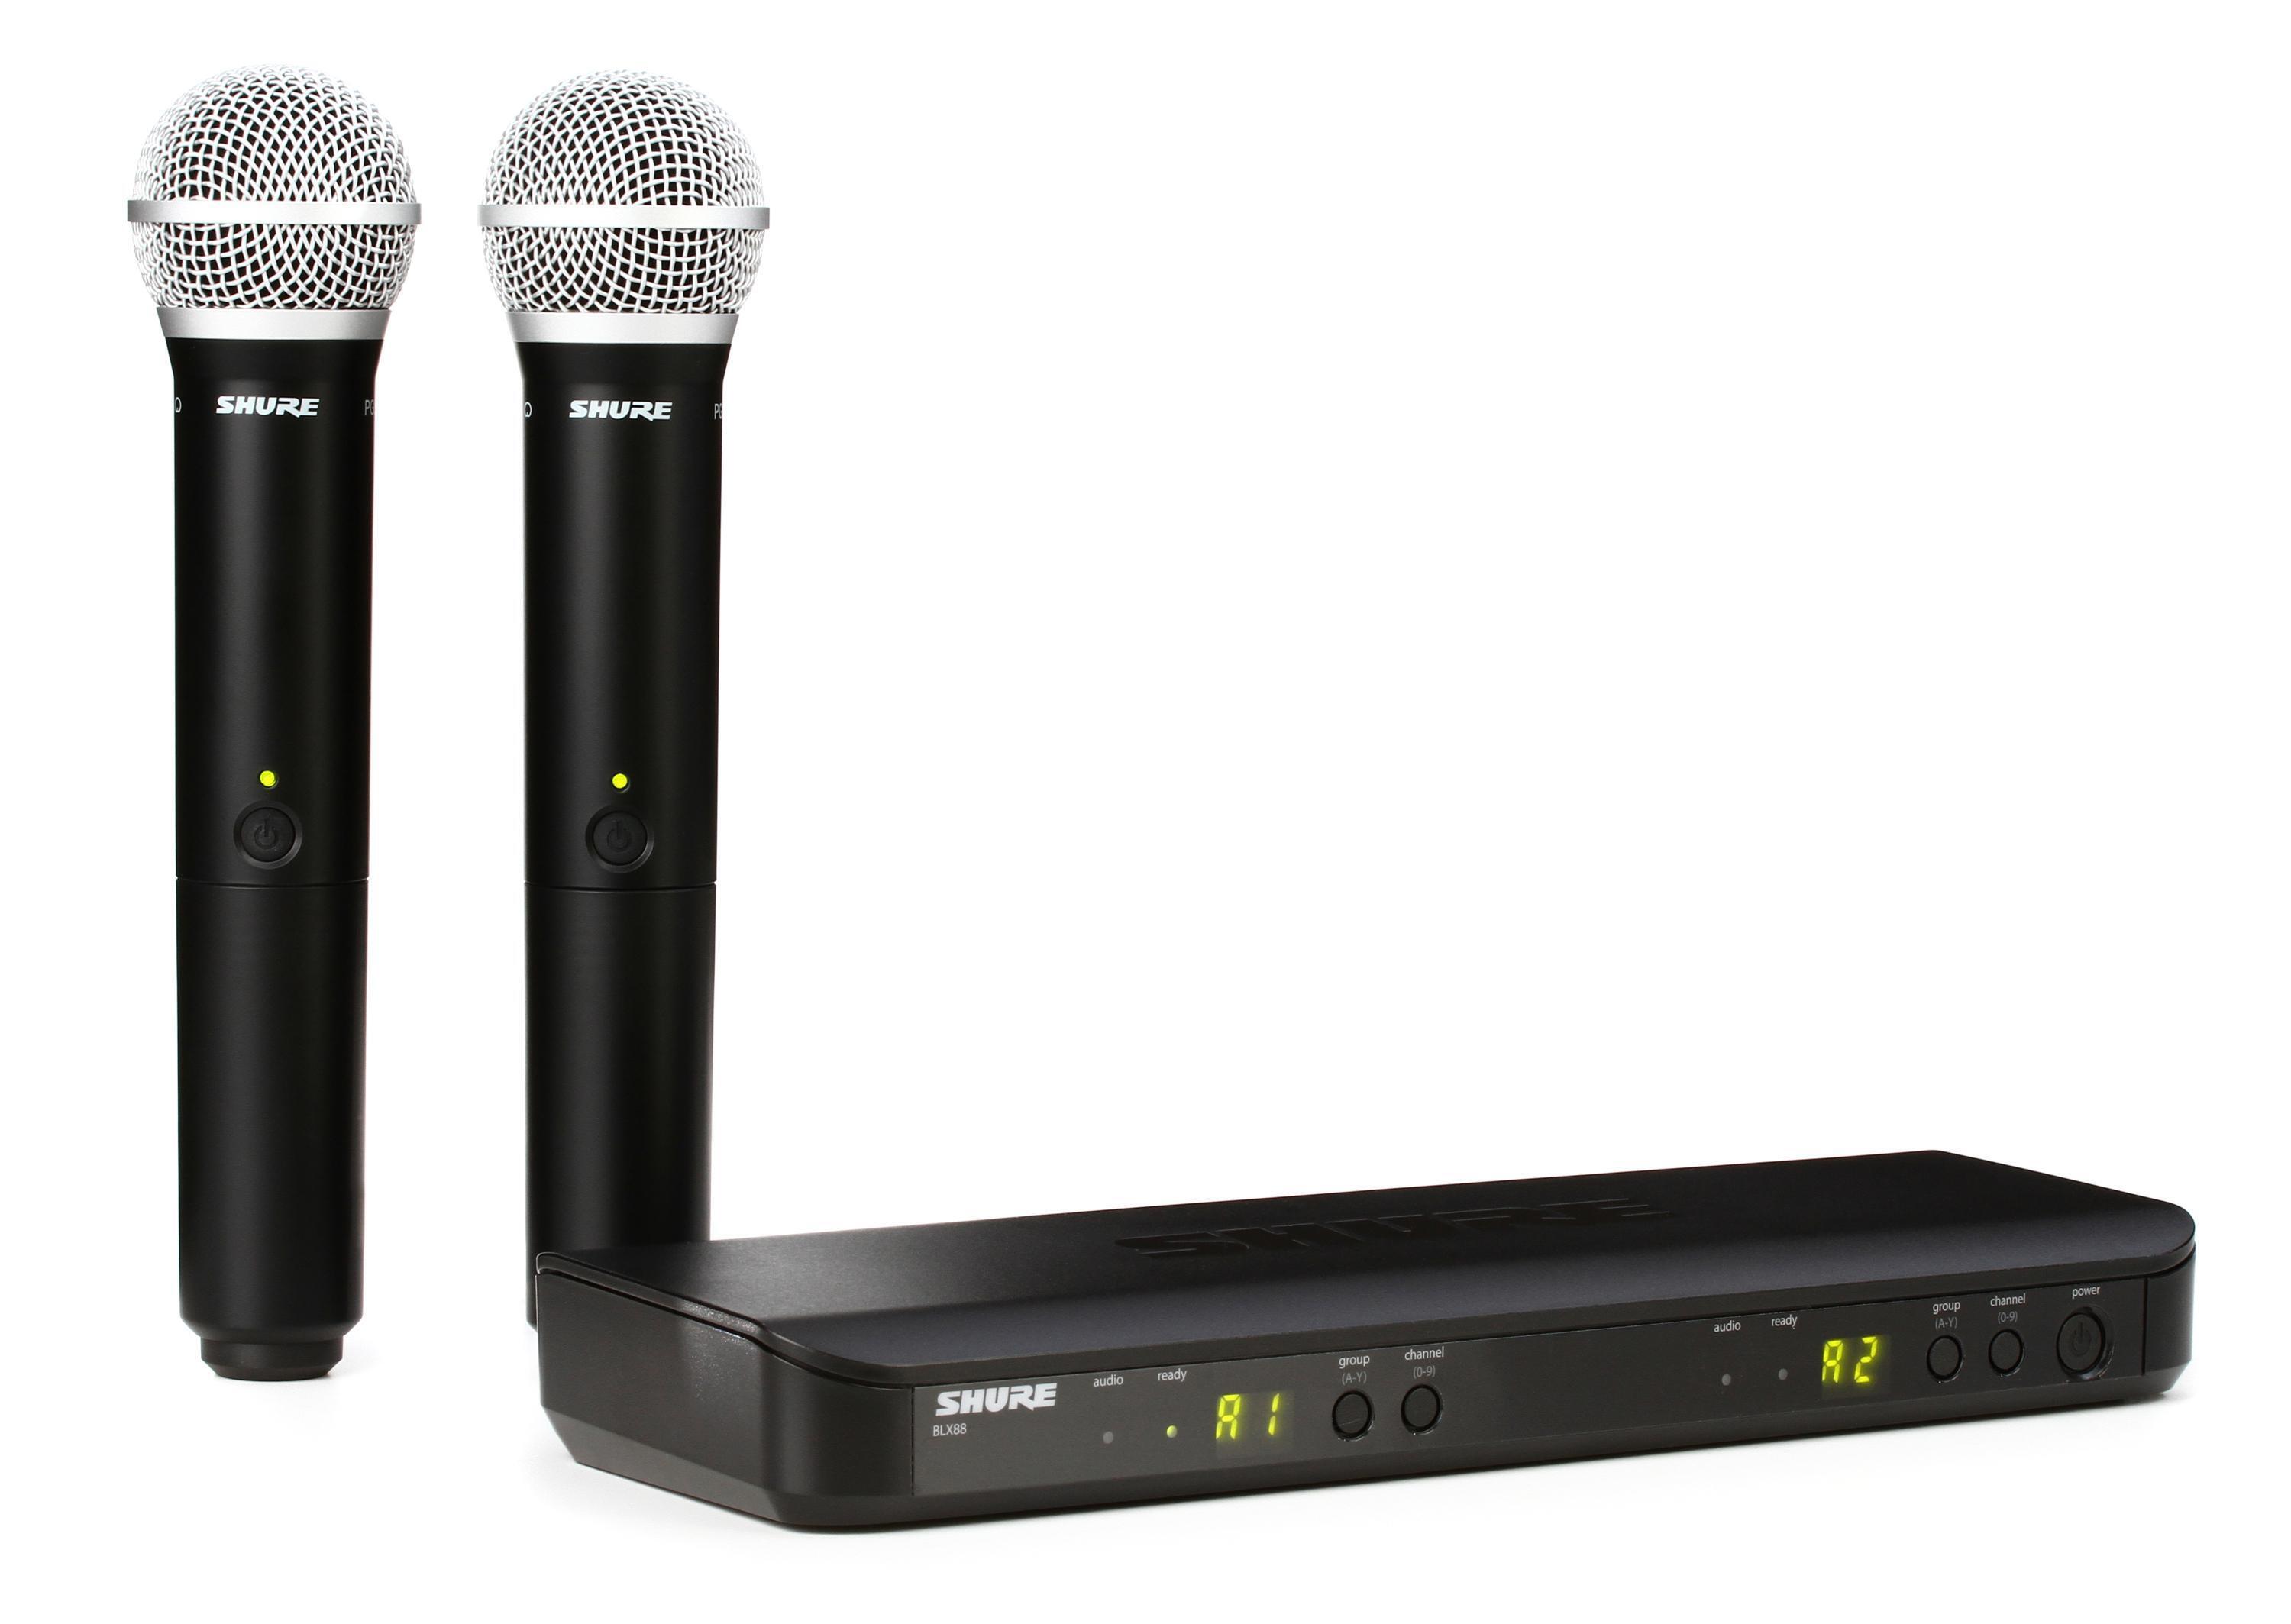 Wireless　Dual　Channel　System　H10　Reviews　Band　Handheld　Shure　Microphone　BLX288/PG58　Sweetwater